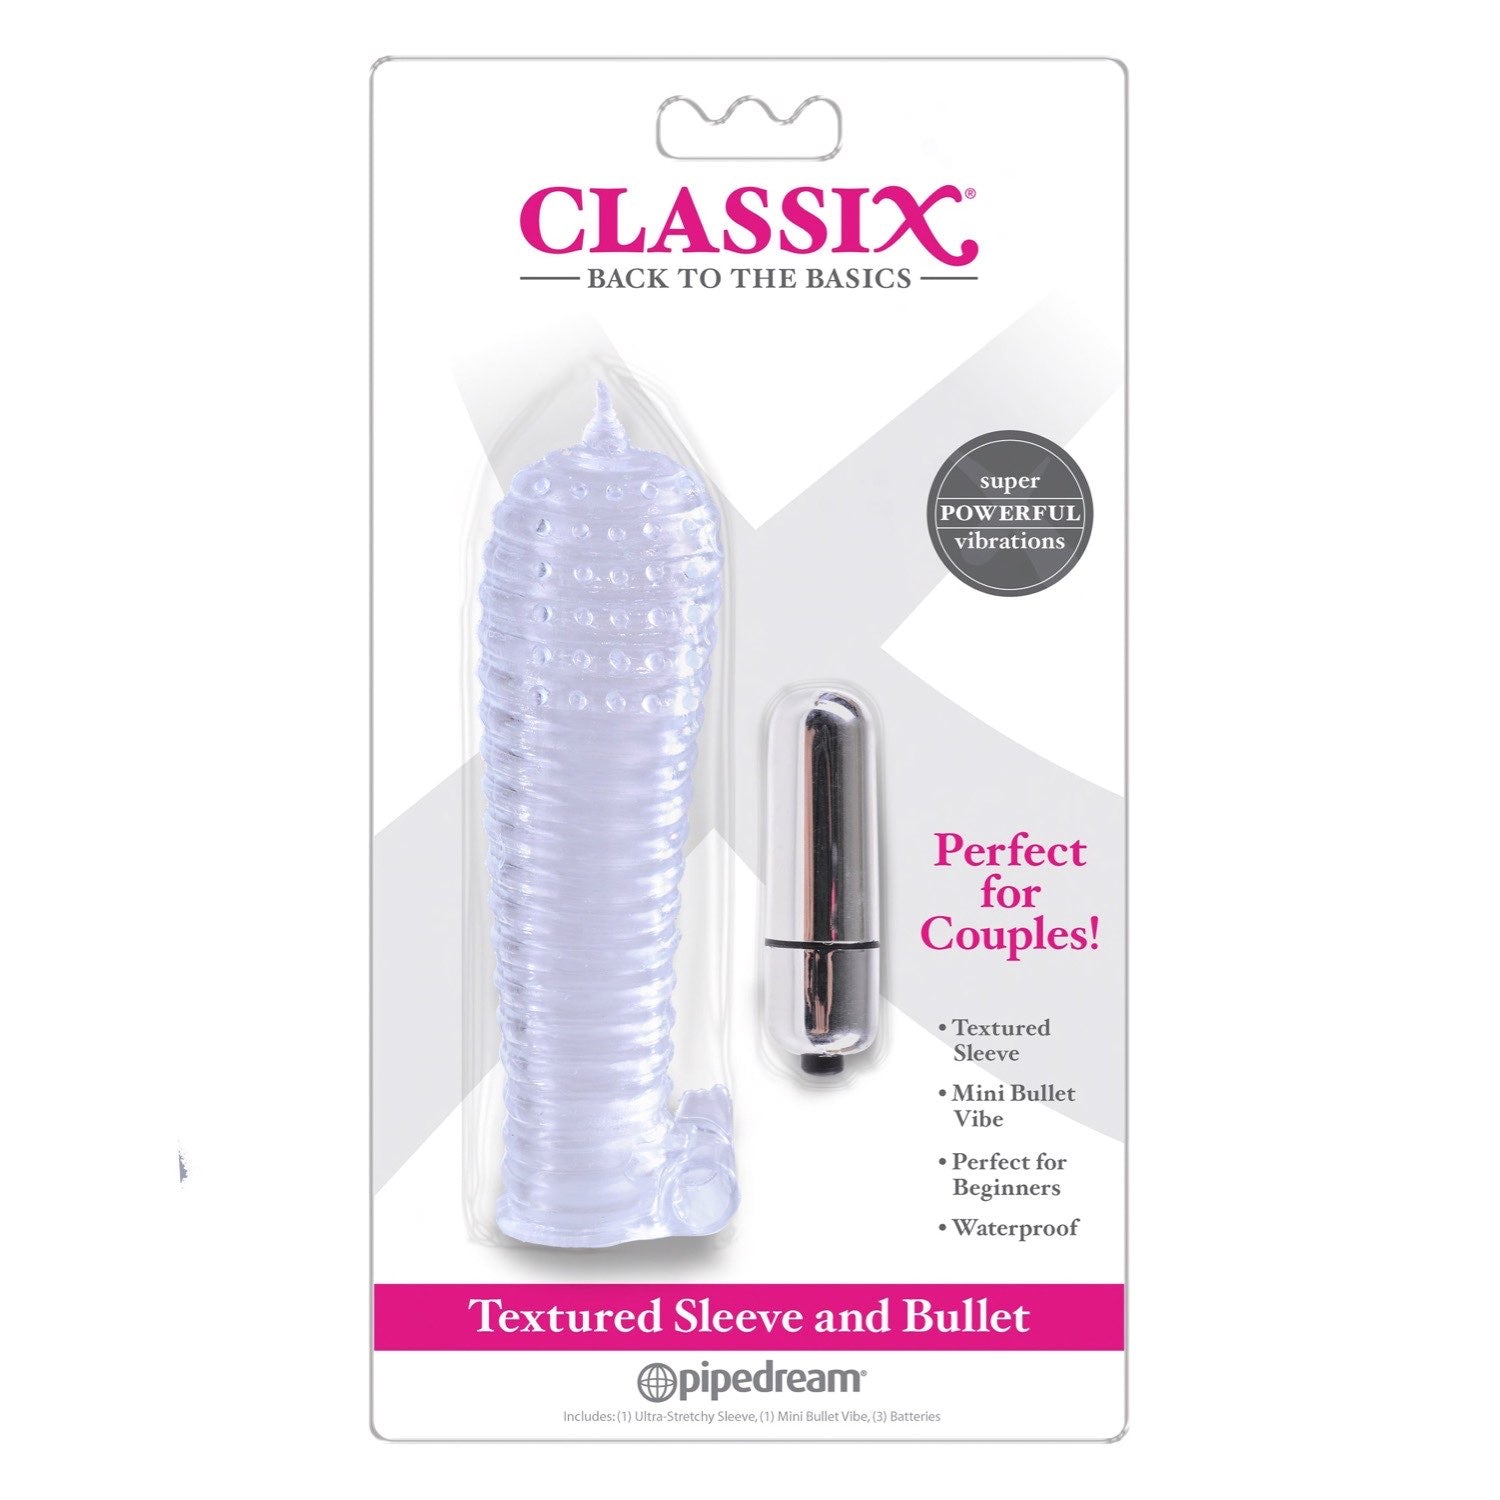 Classix Textured Sleeve &amp; Bullet - Clear Penis Sleeve and Bullet by Pipedream